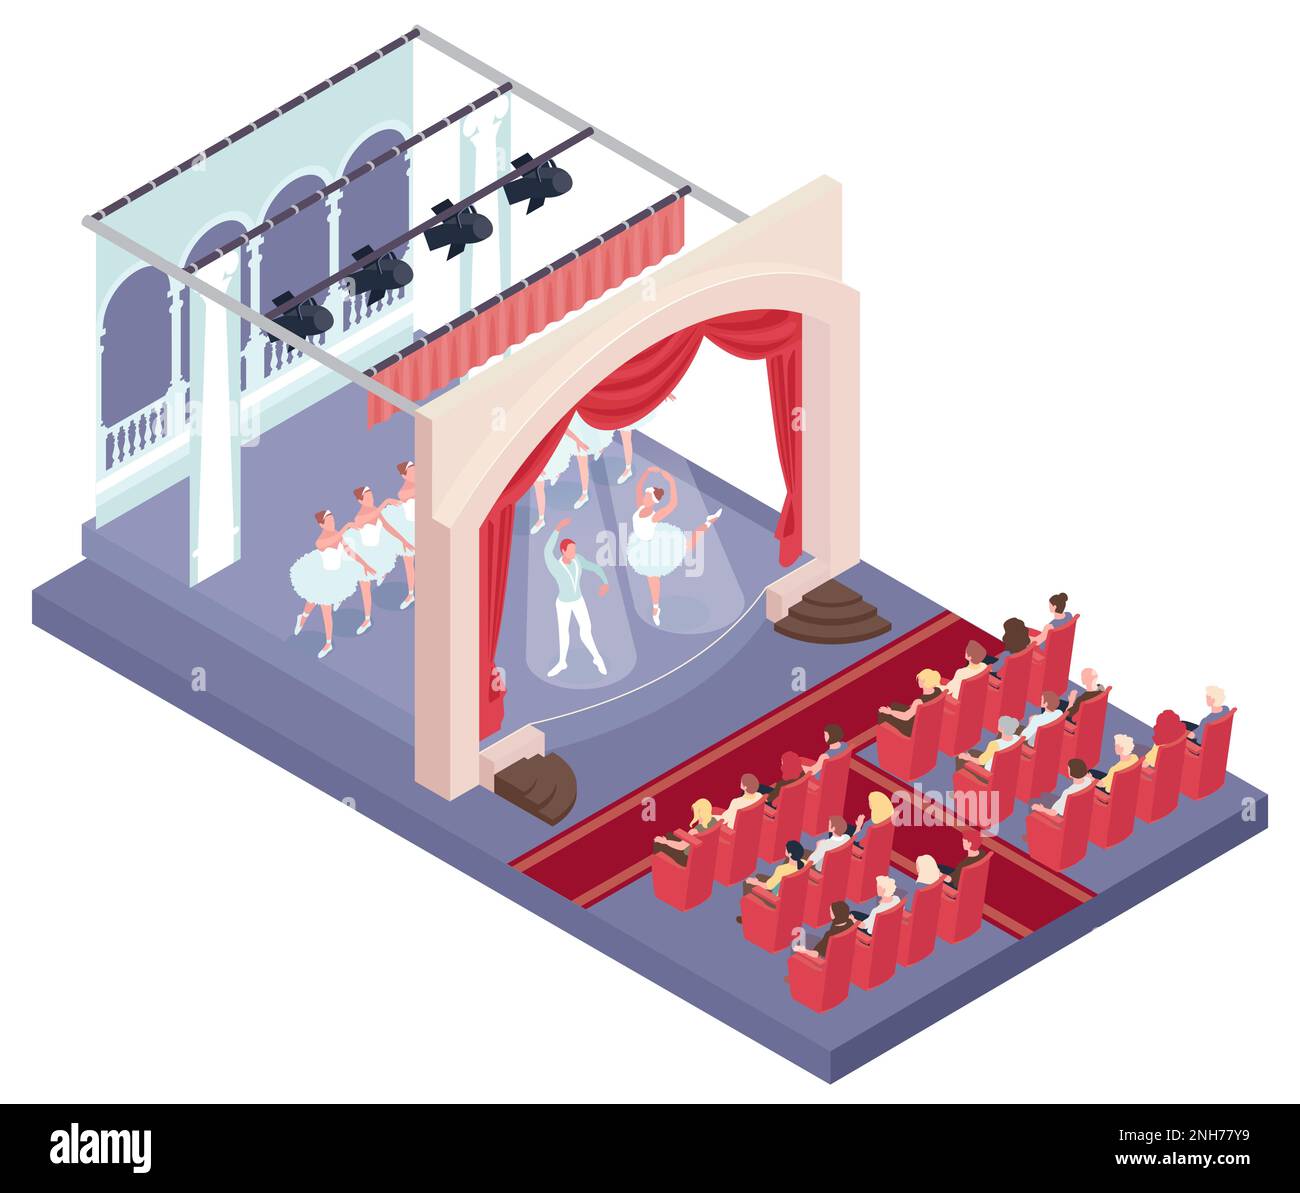 Theatre concept with ballet performance and scenery symbols isometric vector illustration Stock Vector